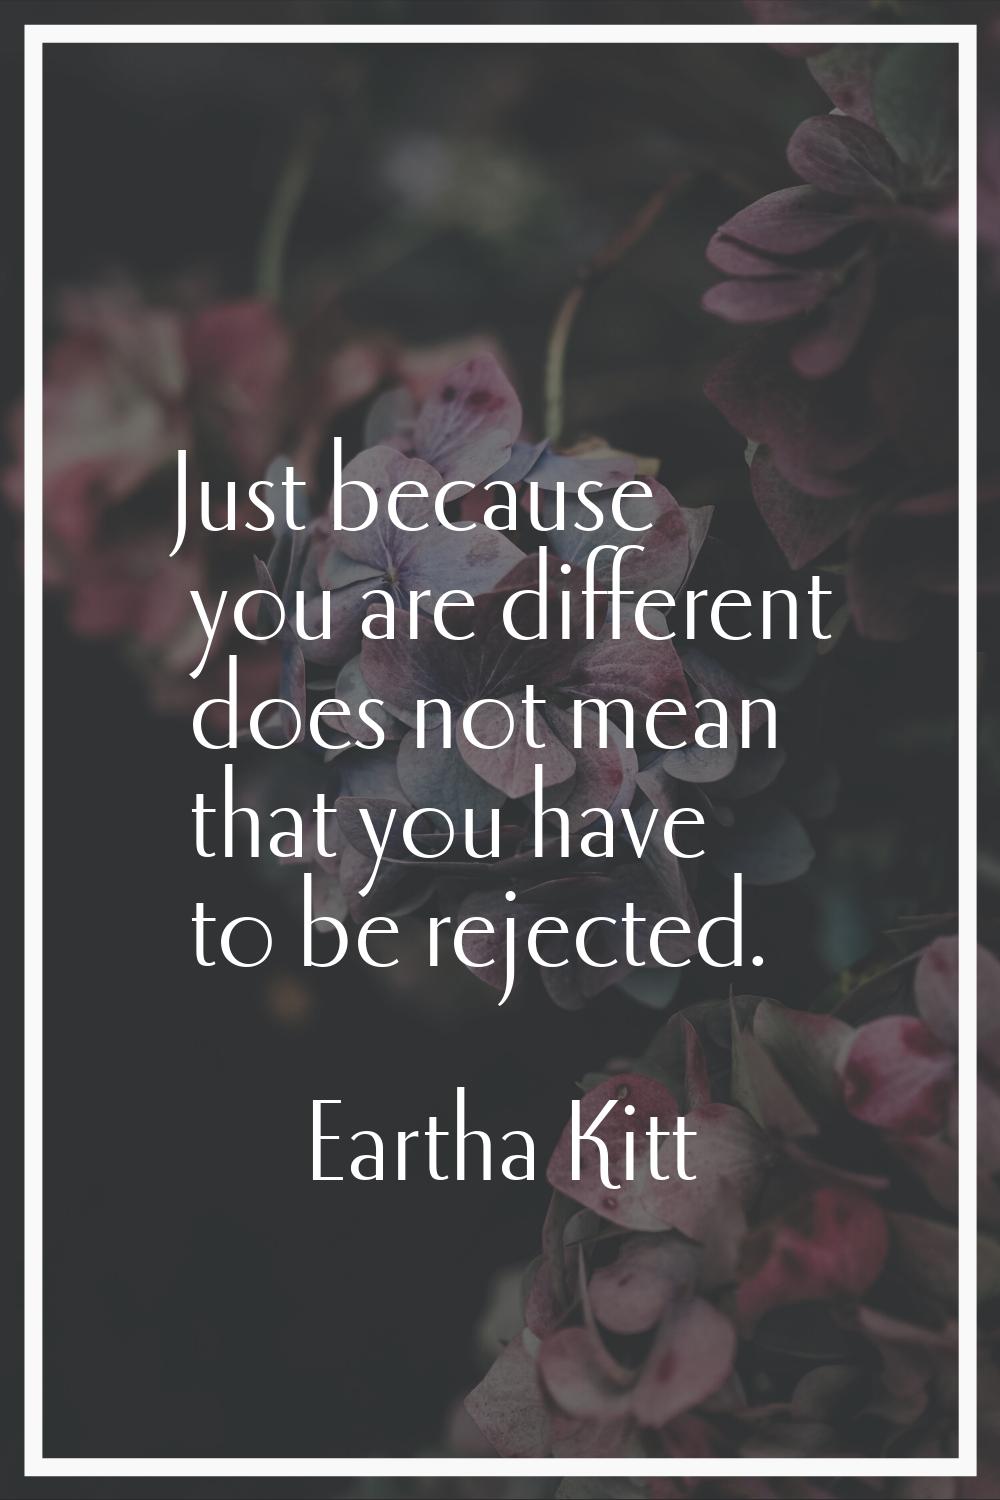 Just because you are different does not mean that you have to be rejected.